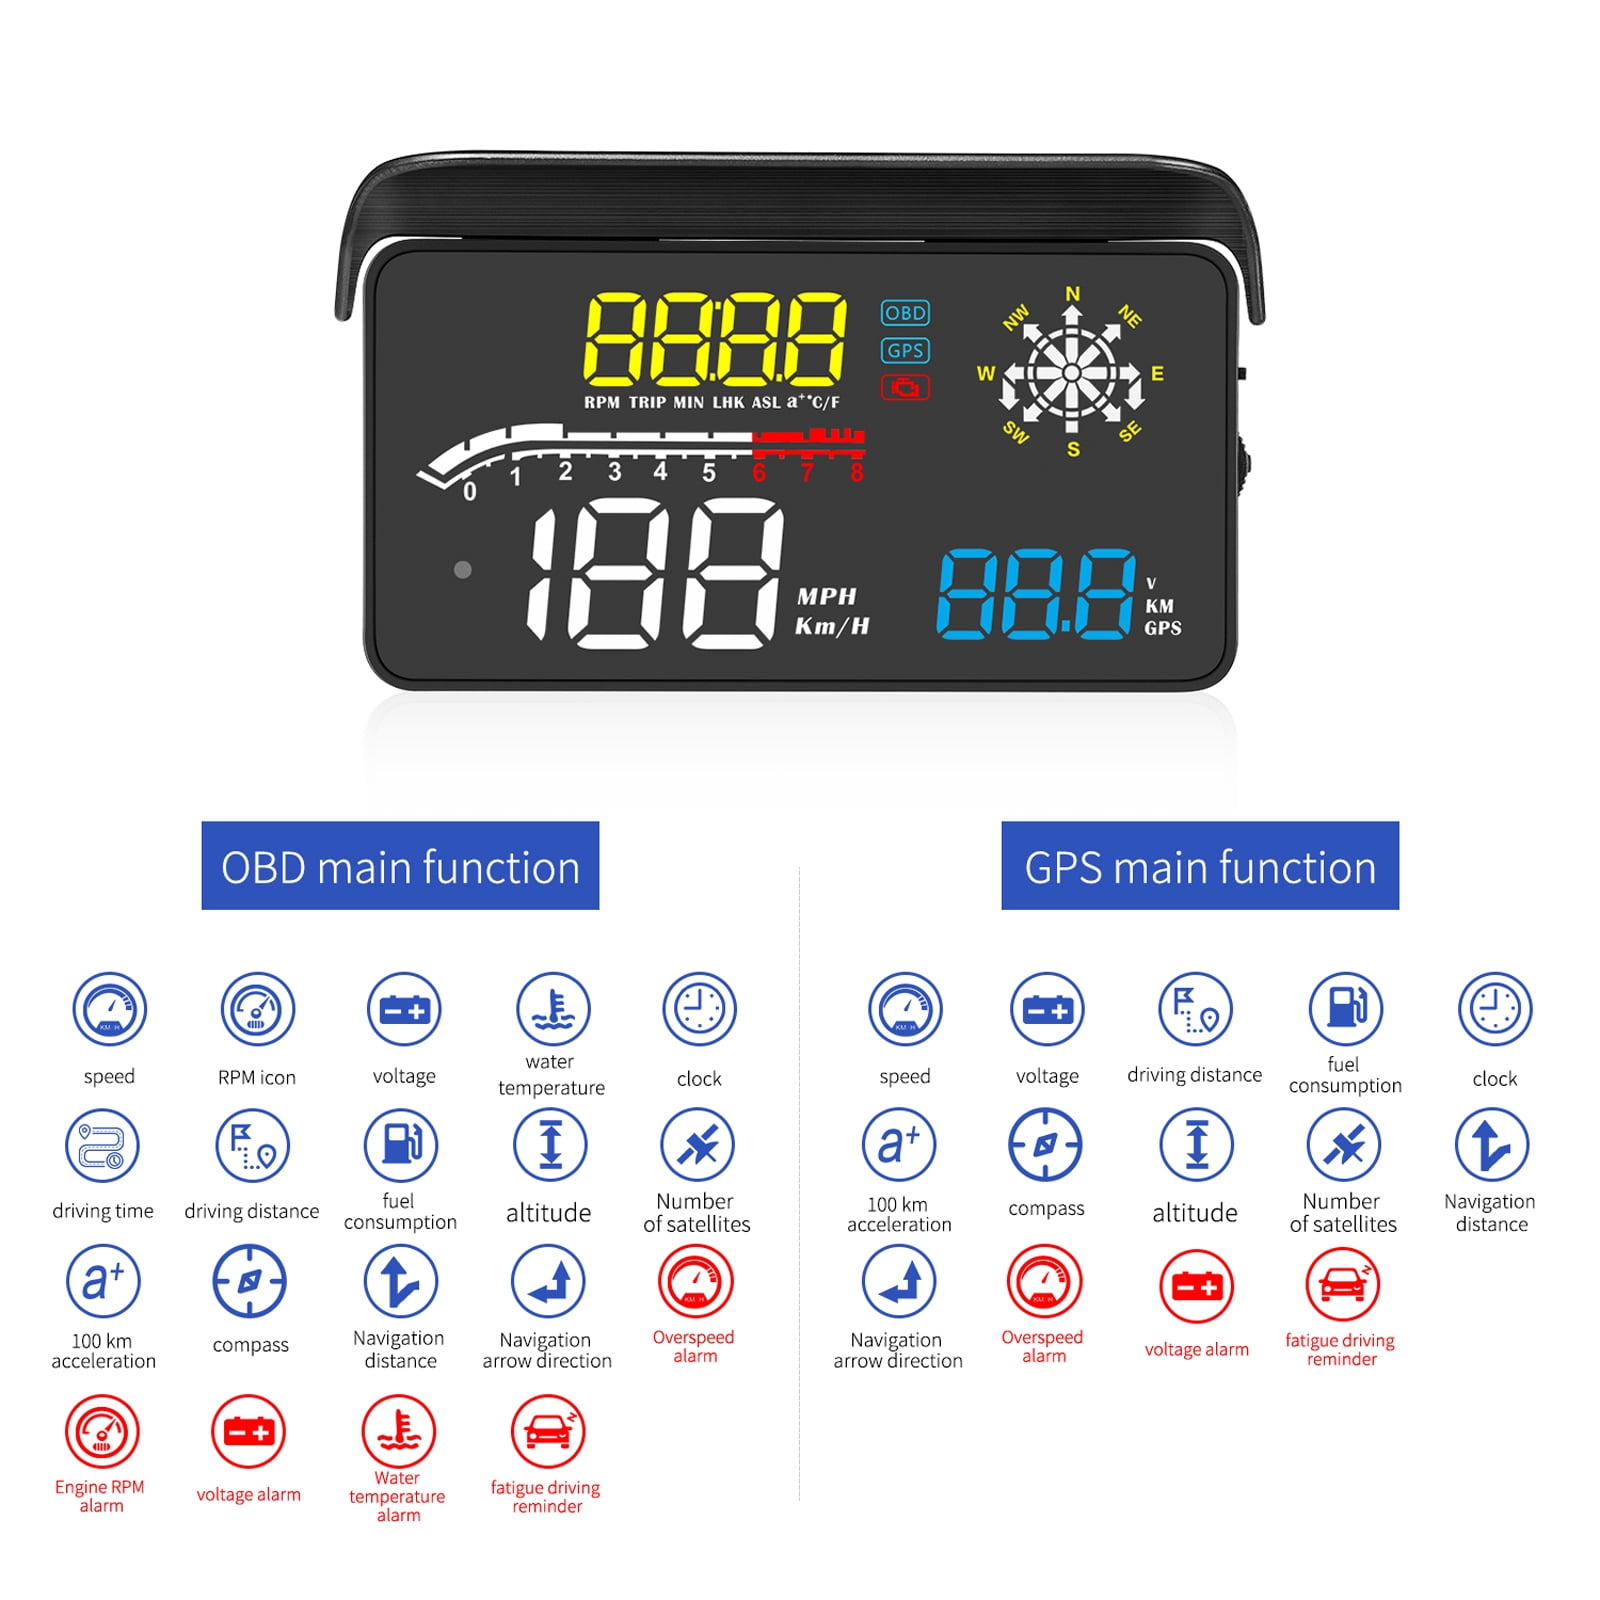 gdgsd Head-up Display,Car OBD2 HUD Universal Navigation Version Over-Speed Warning Windshield Projector System Auto Data Display with Reflection of D1 Model for All Vehicles 